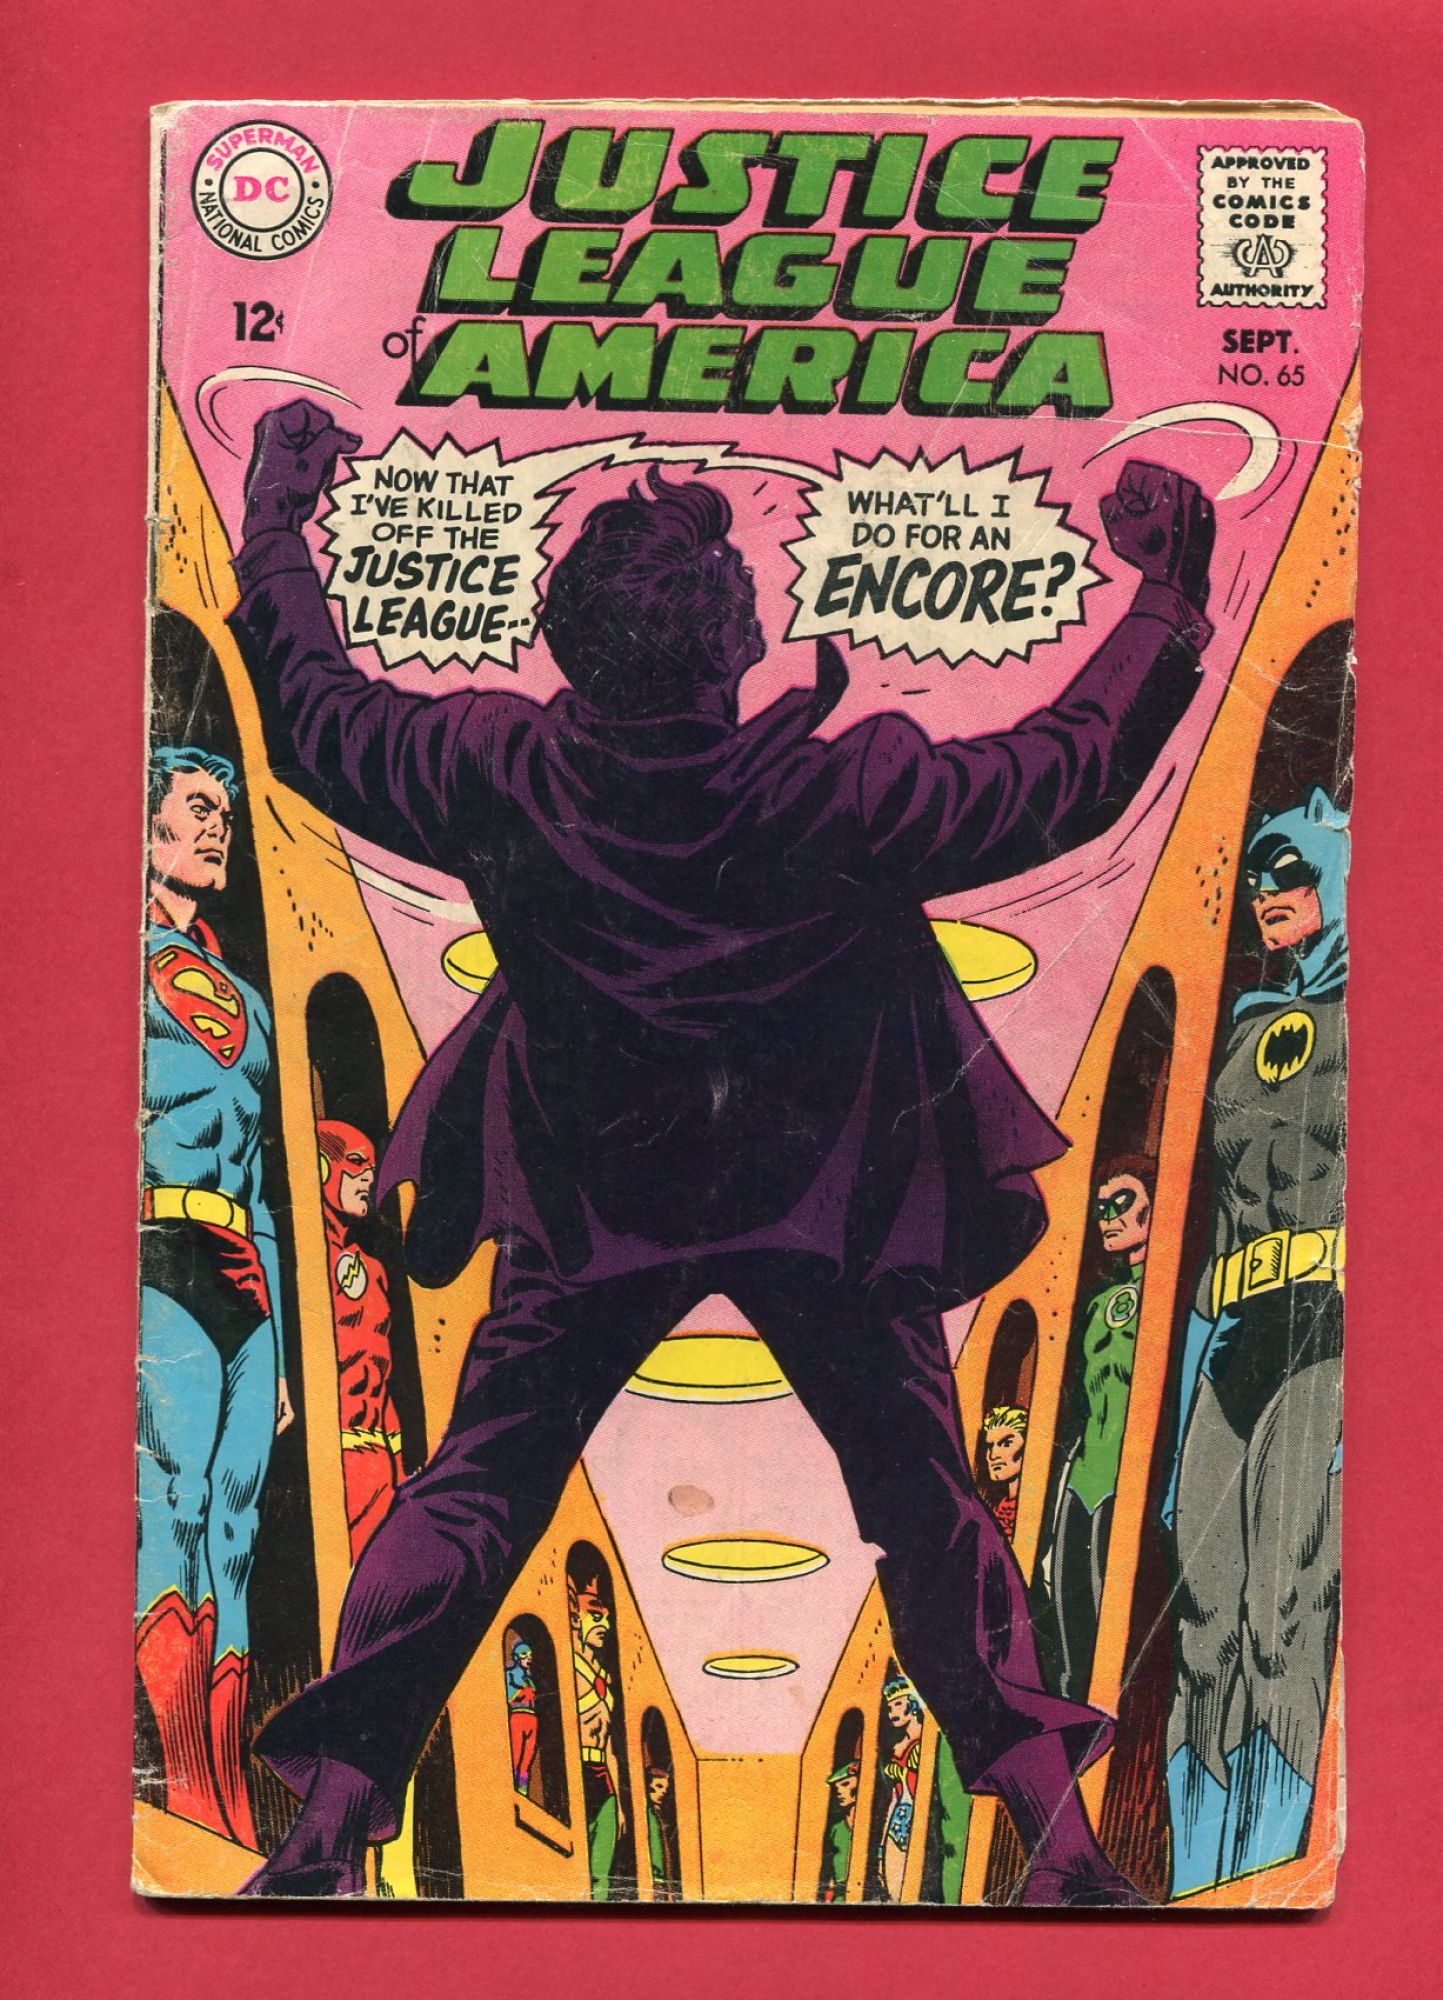 Justice League of America #65, Sep 1968, 3.0 G/VG